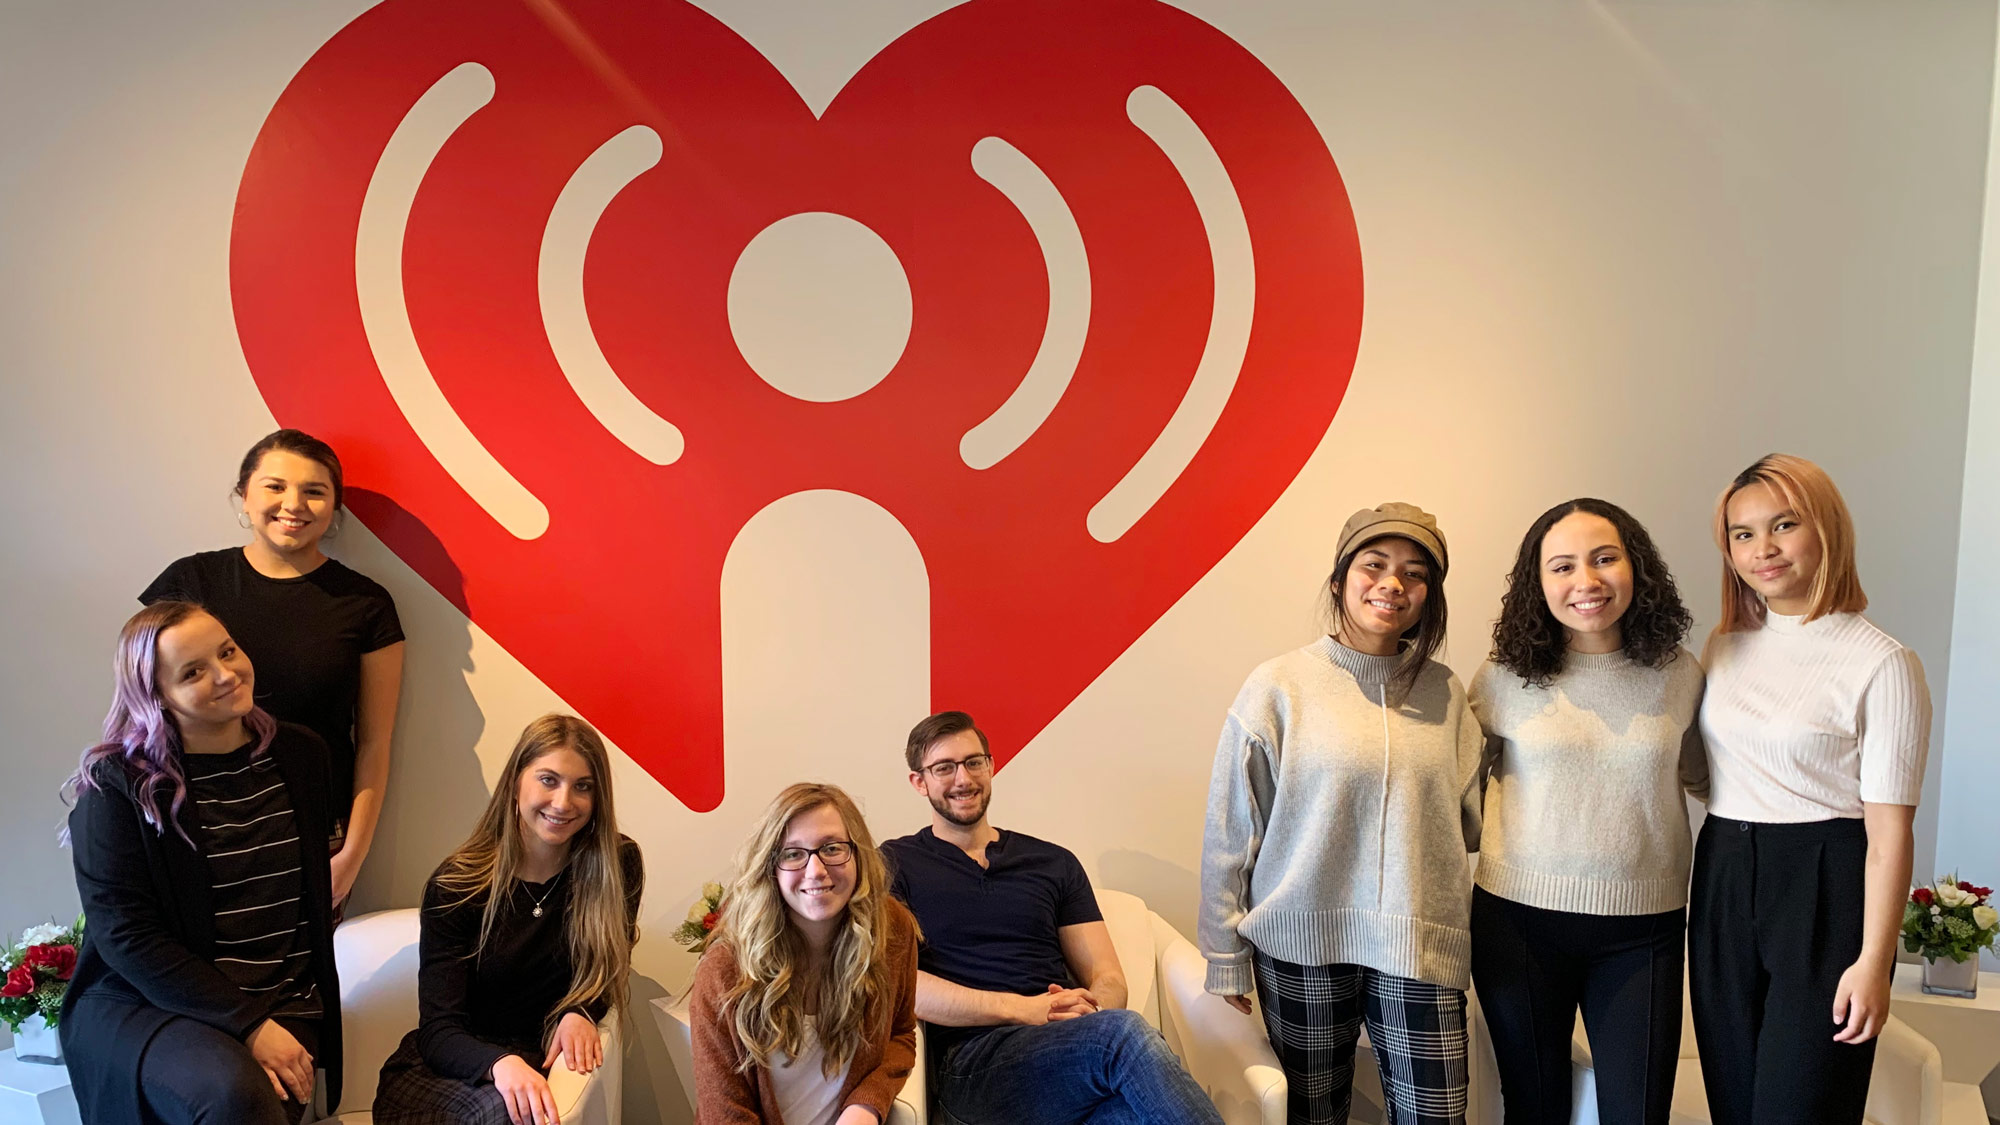 The Ad Society Visits iHeartRadio